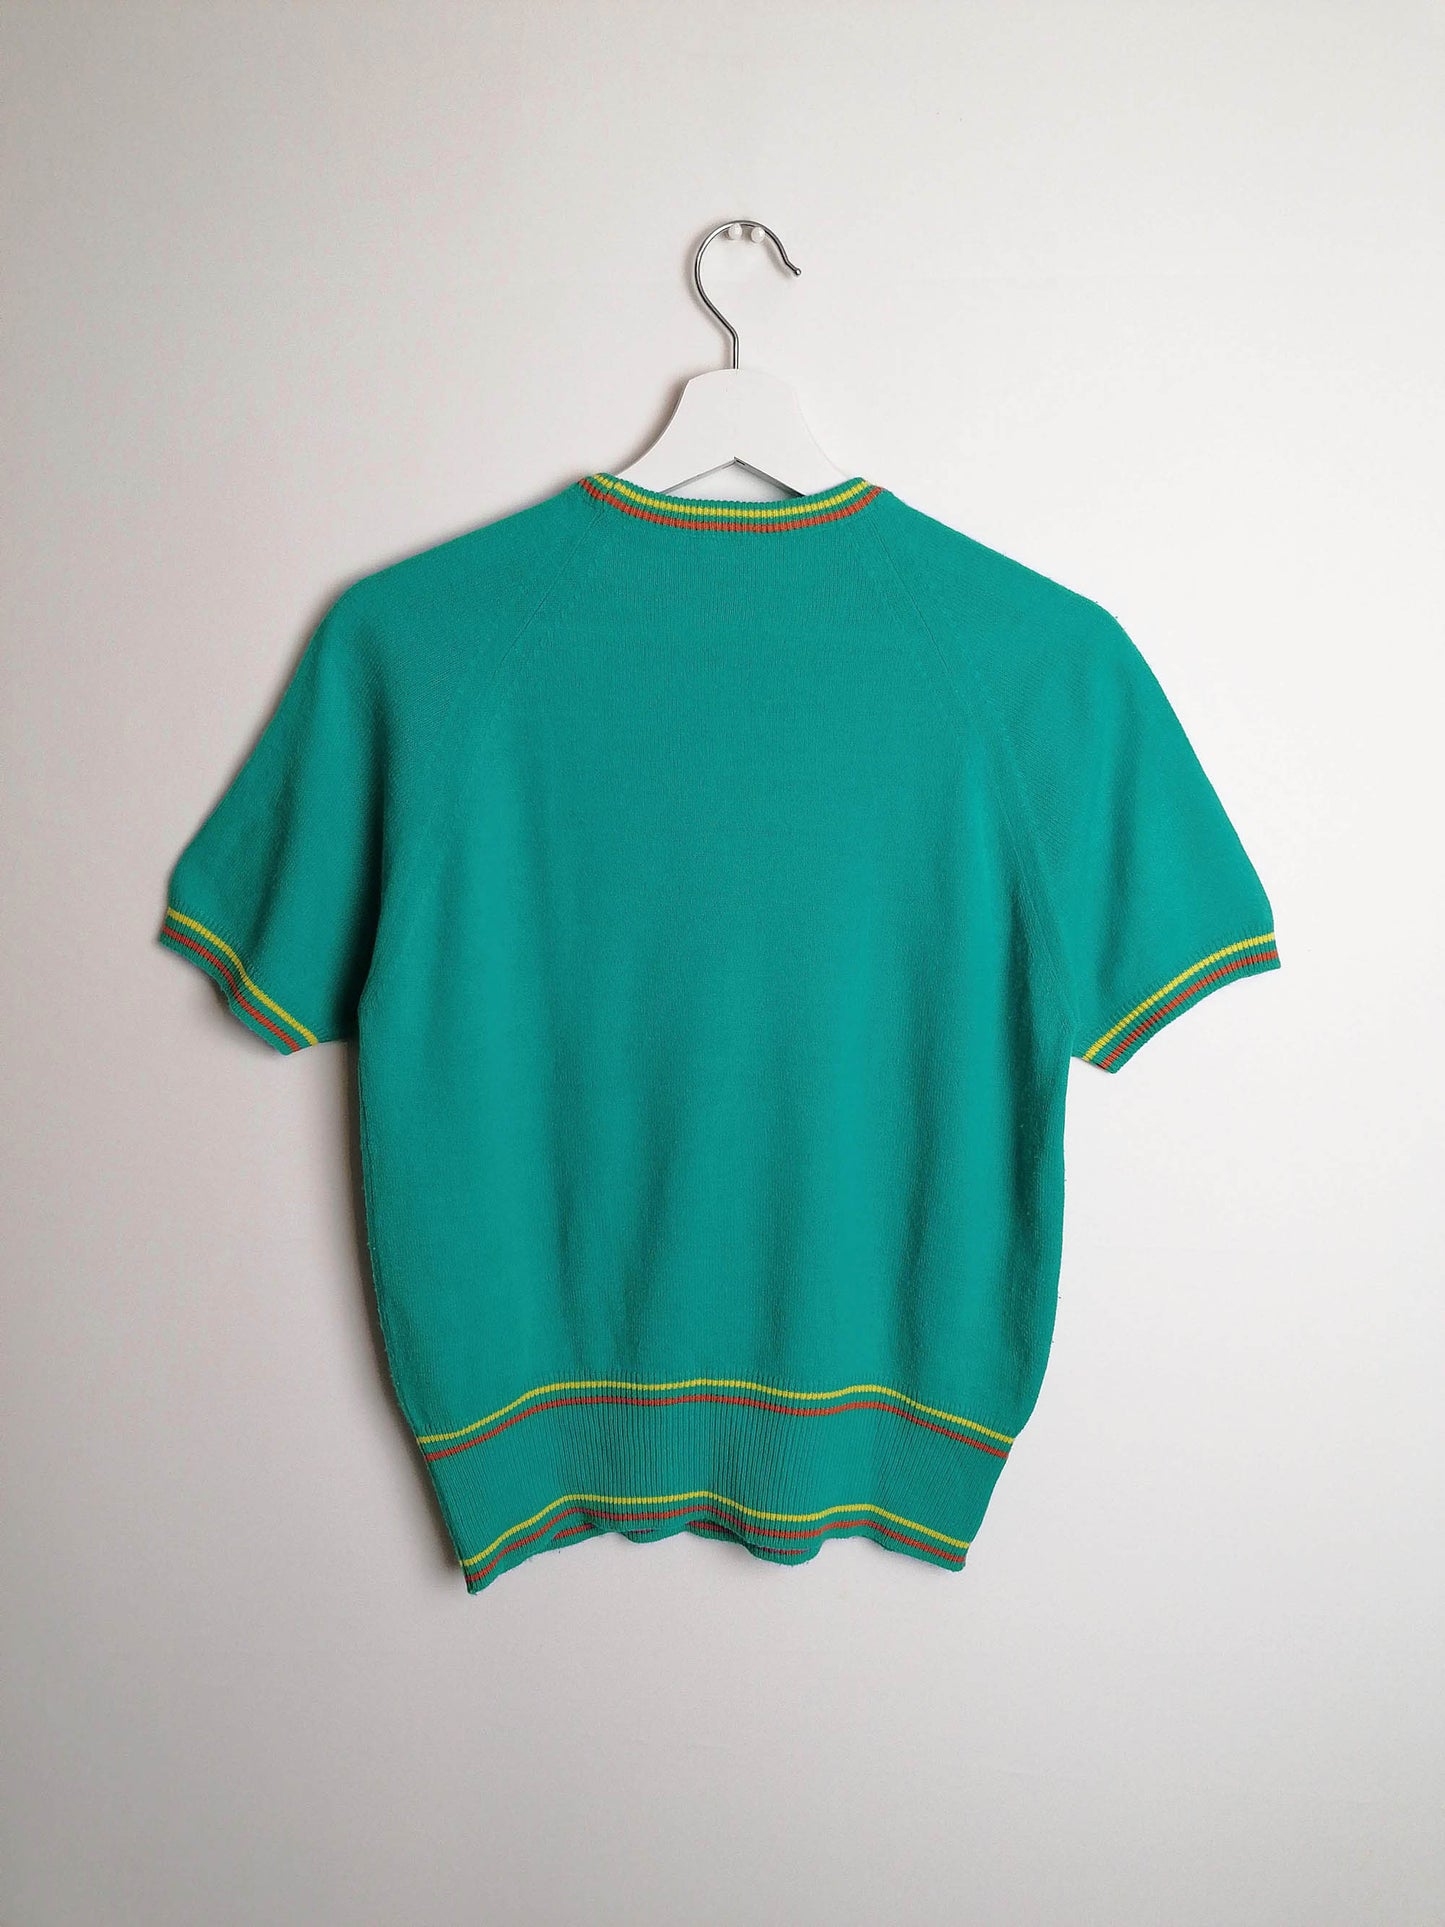 70's FILLEUR Soft Knit Top Retro Turquoise Green - size S-M